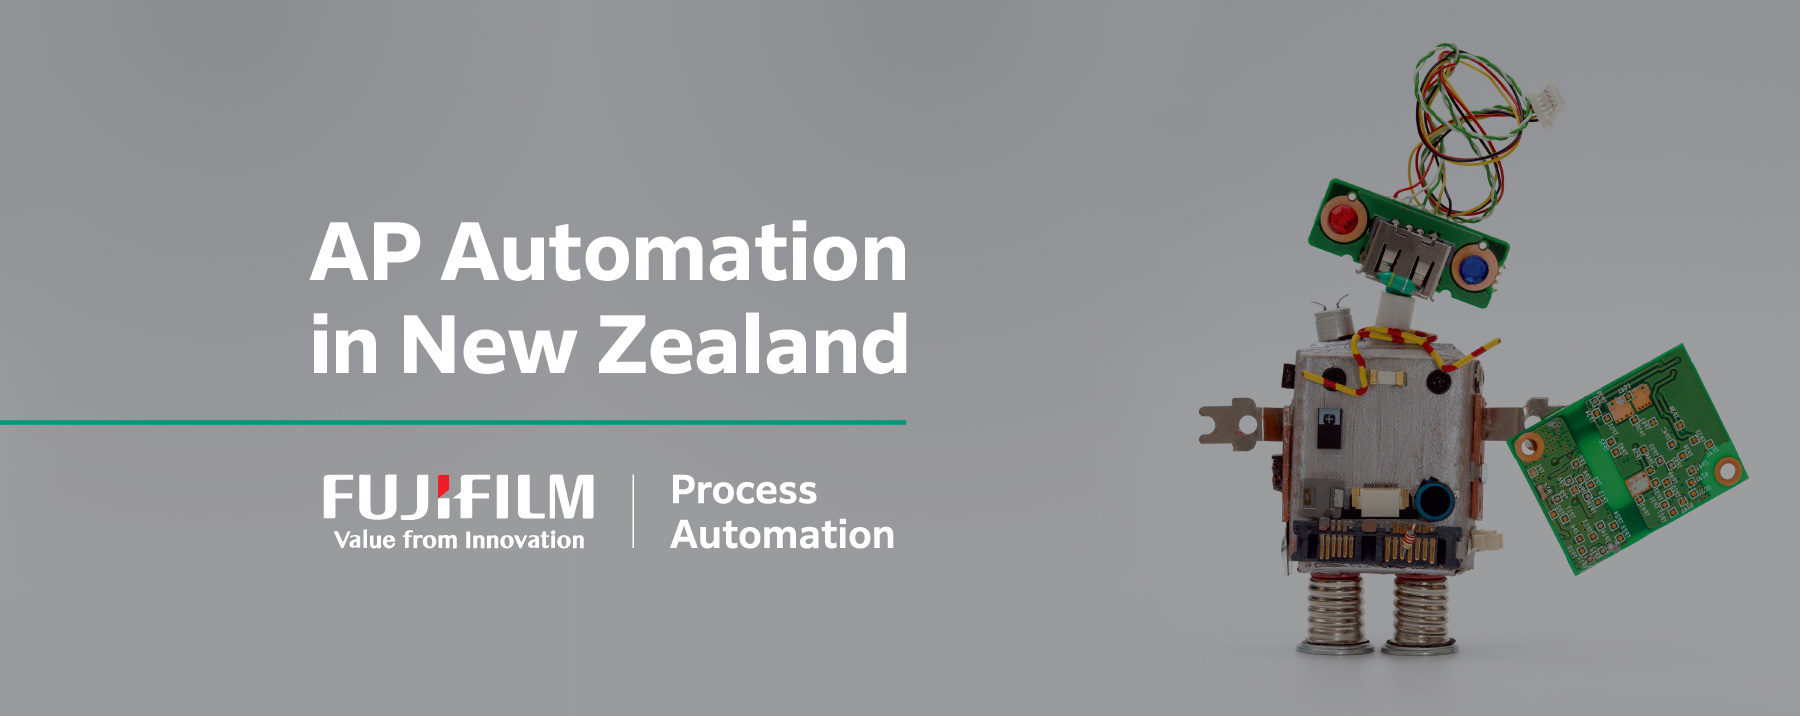 AP Automation in New Zealand - the basics, situation and how to build a business case